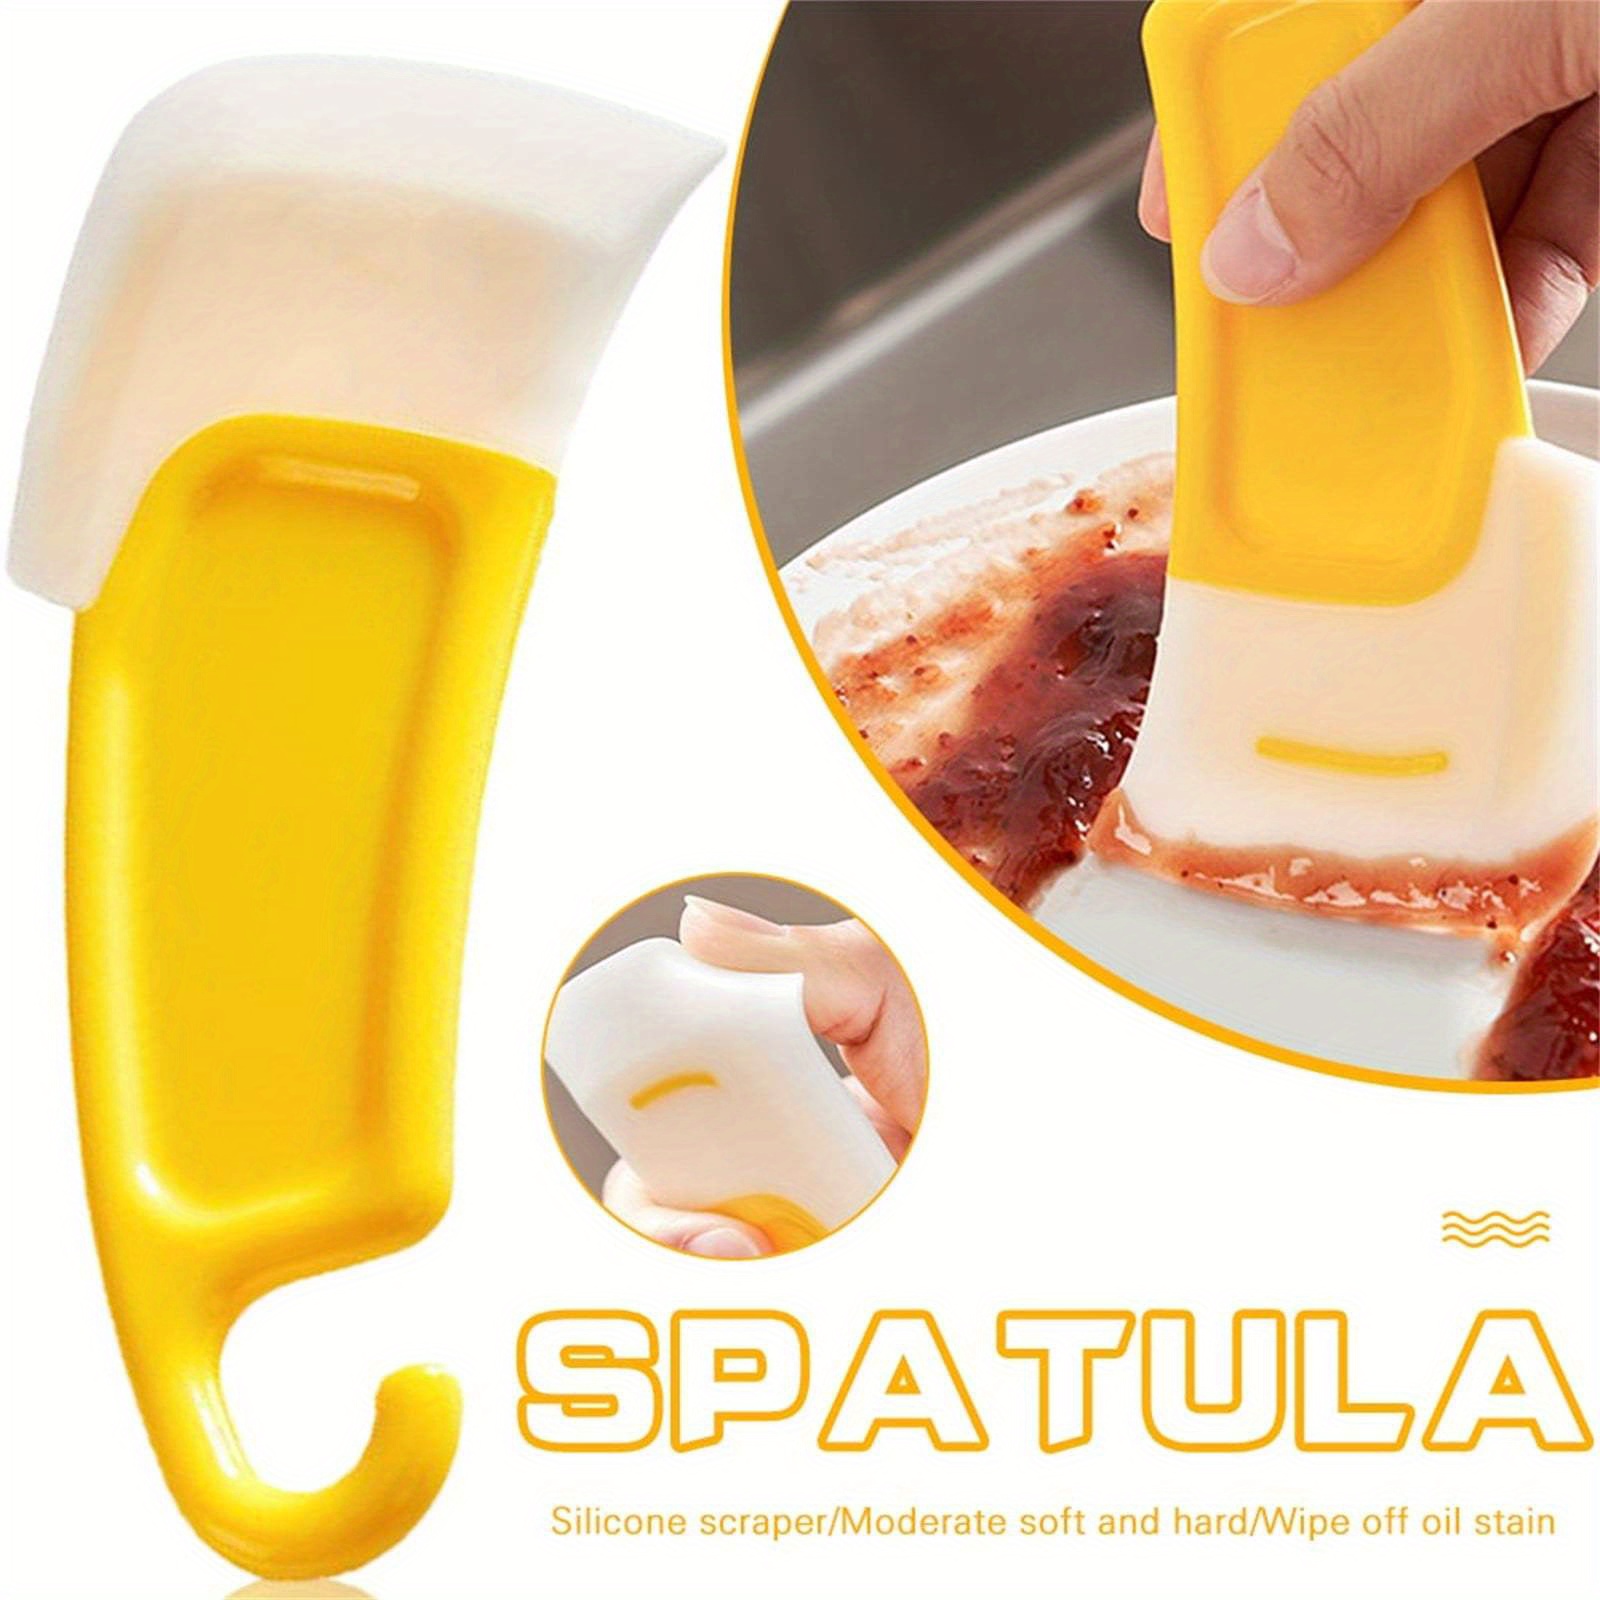  OTOTO Splatypus Jar Spatula for Scooping and Scraping - Unique  Fun Cooking Kitchen Gadgets for Foodies - BPA-free & 100% Food Safe - Crepe  Spreader : Home & Kitchen